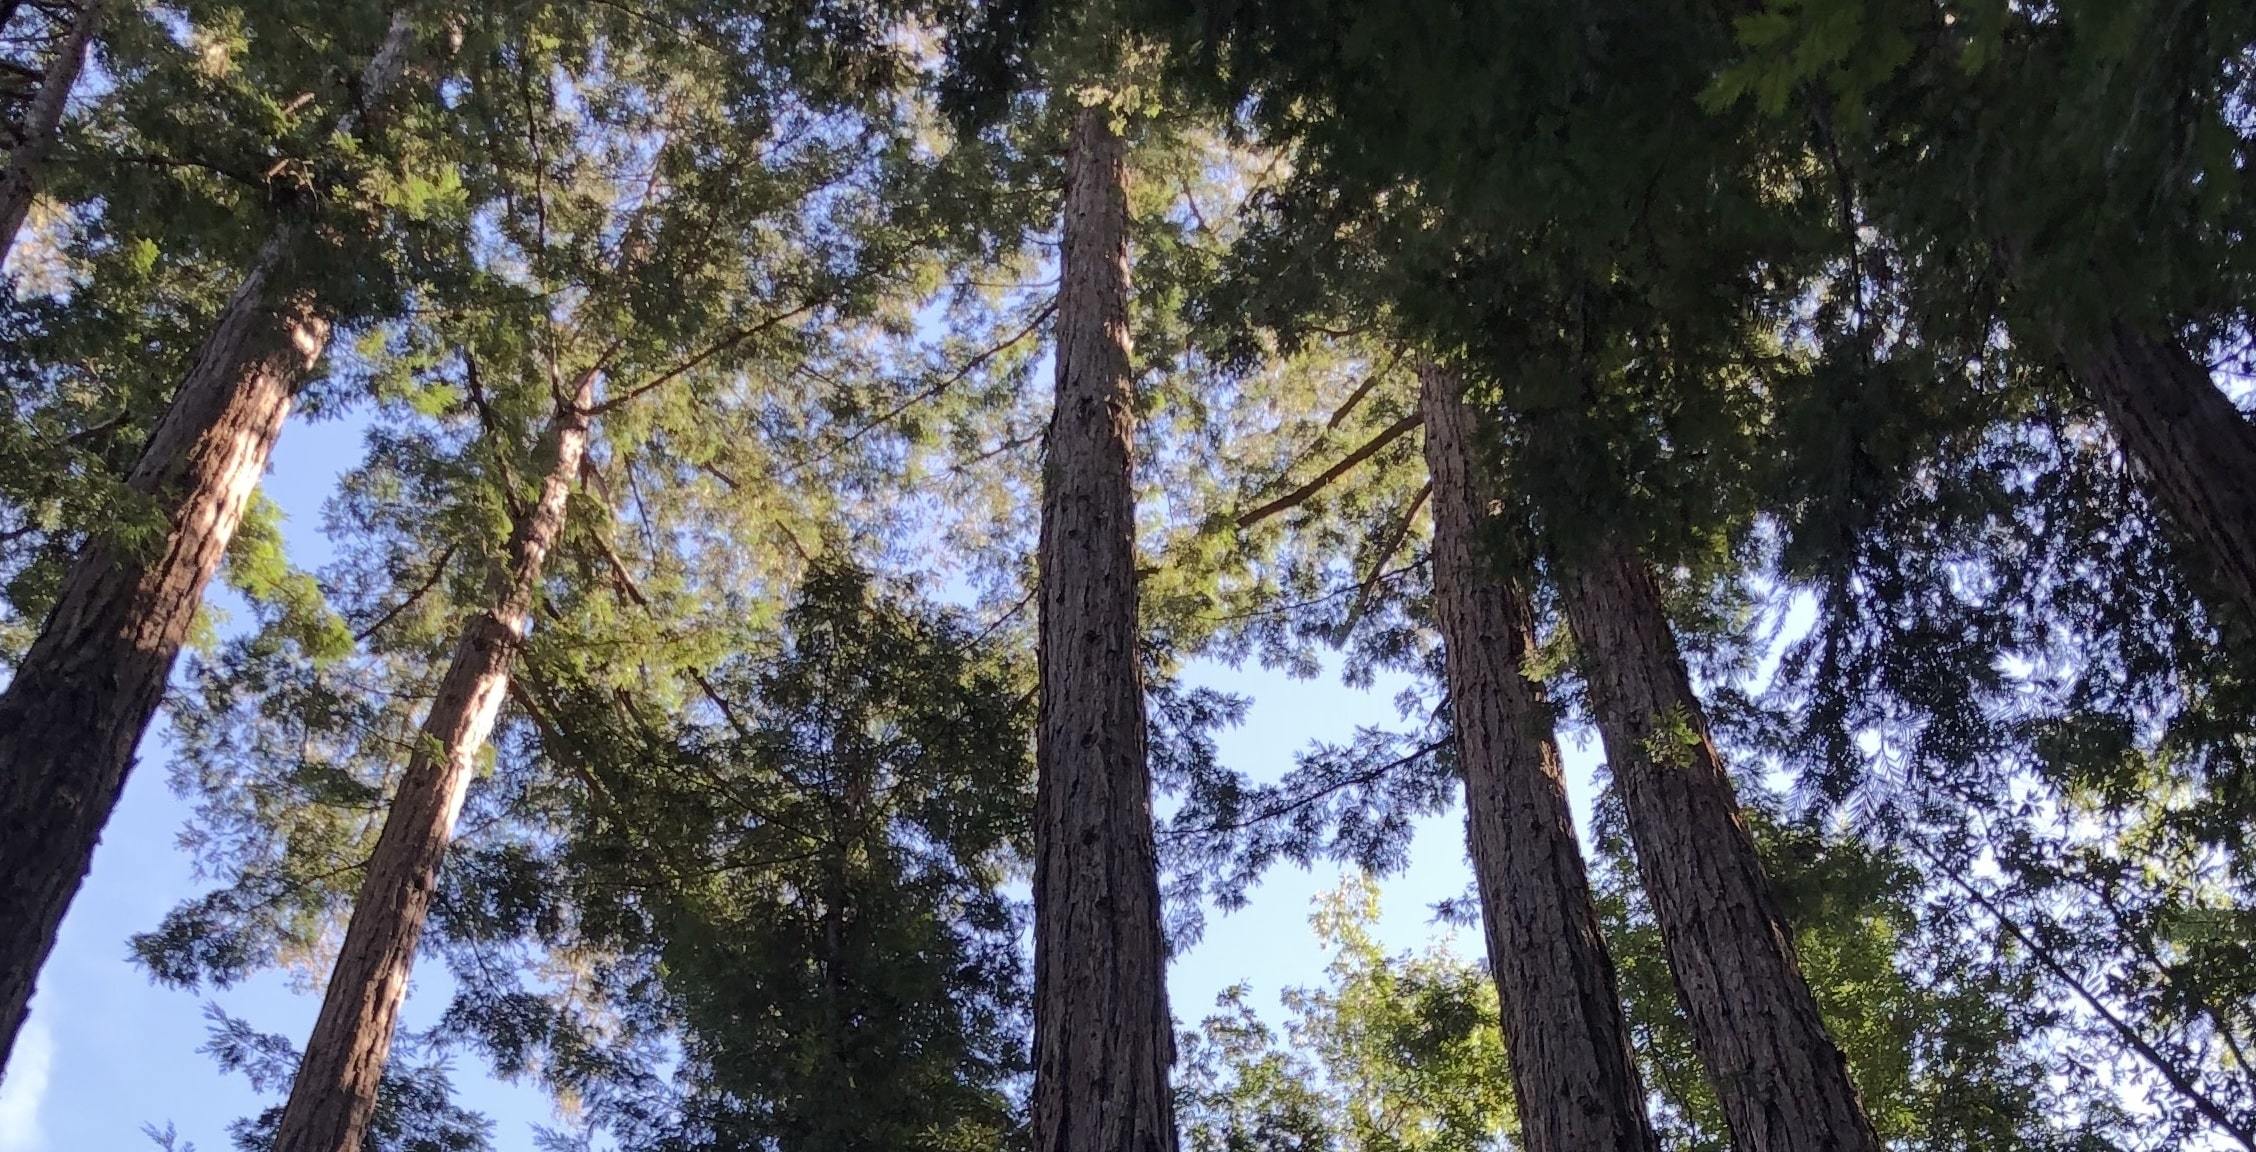 Upwards view of forest canopy in Henry Cowell Redwoods State Park, Felton, California